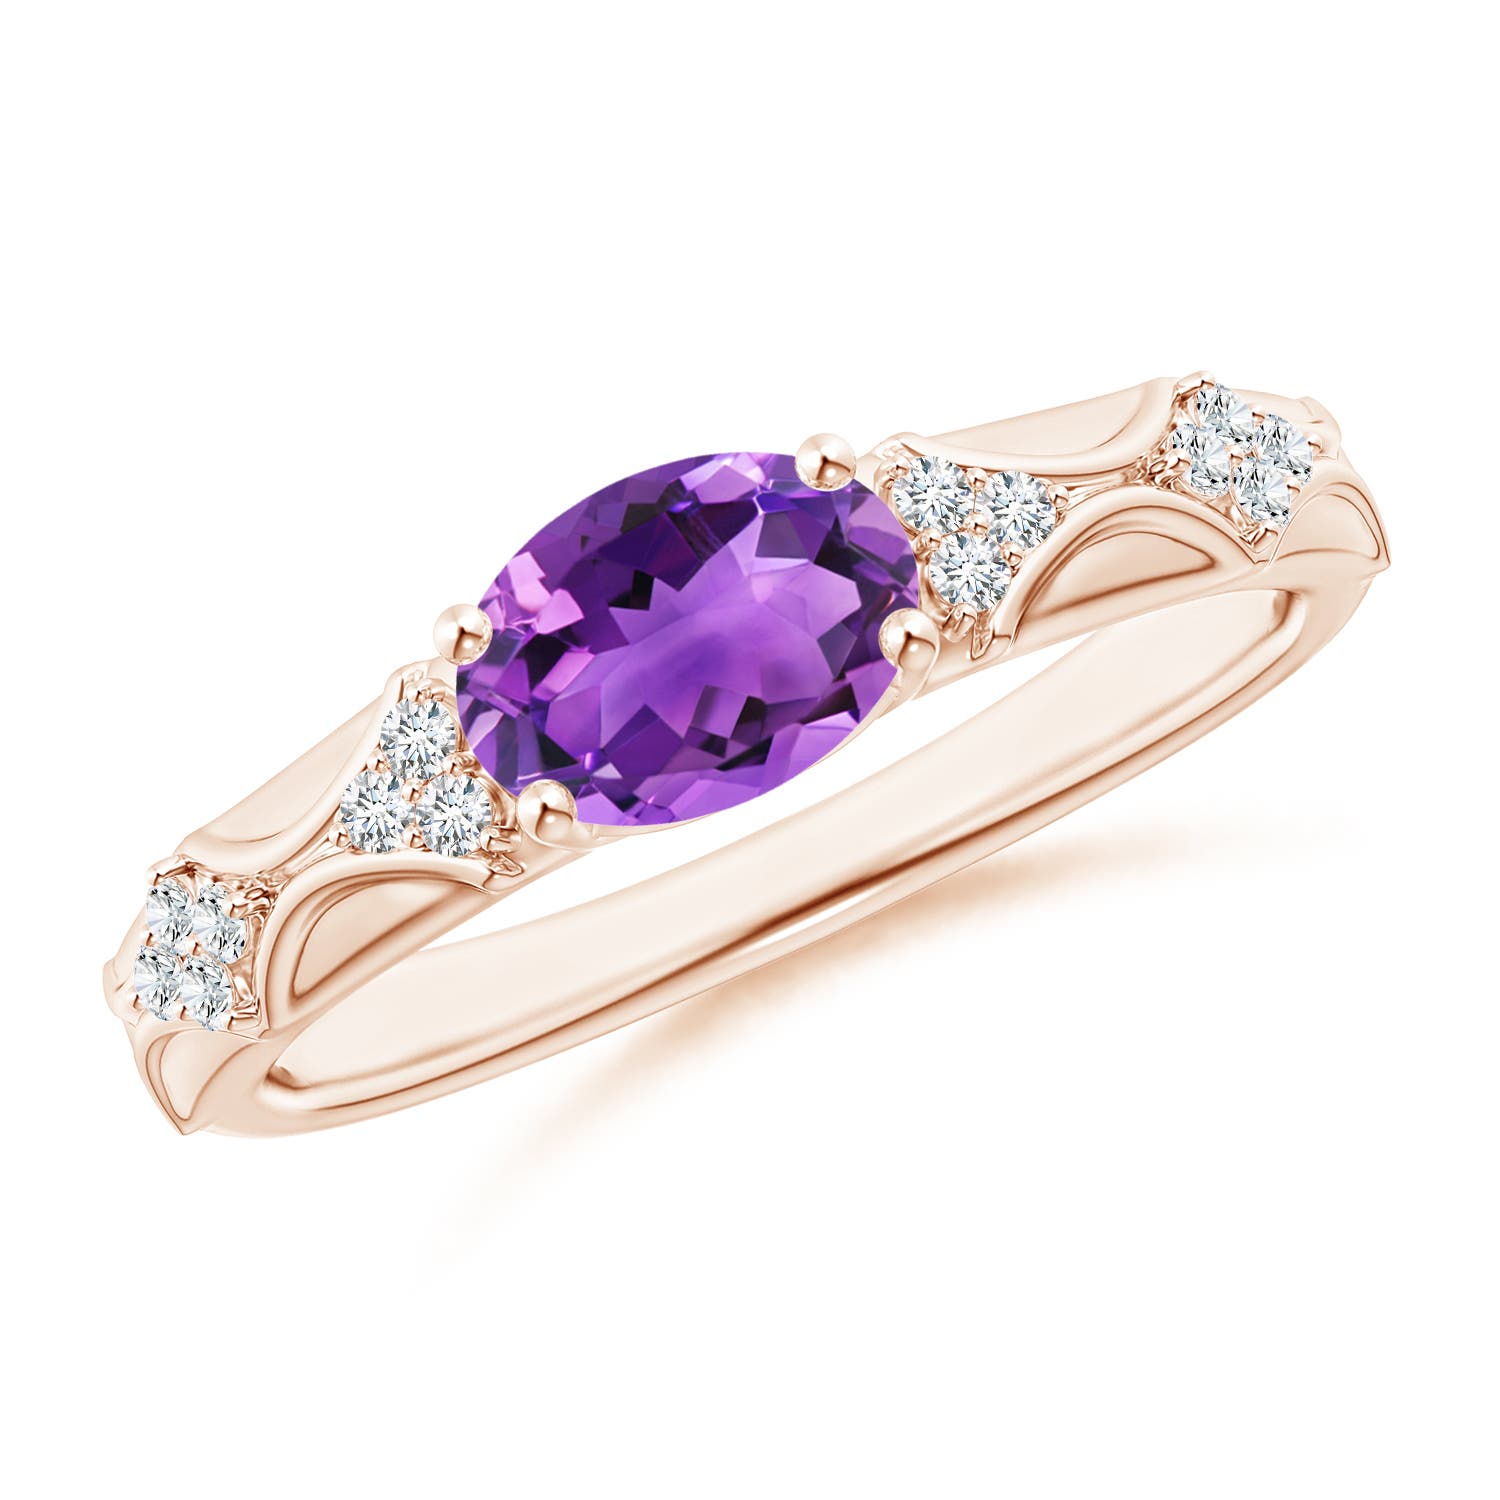 AAA - Amethyst / 1.22 CT / 14 KT Rose Gold